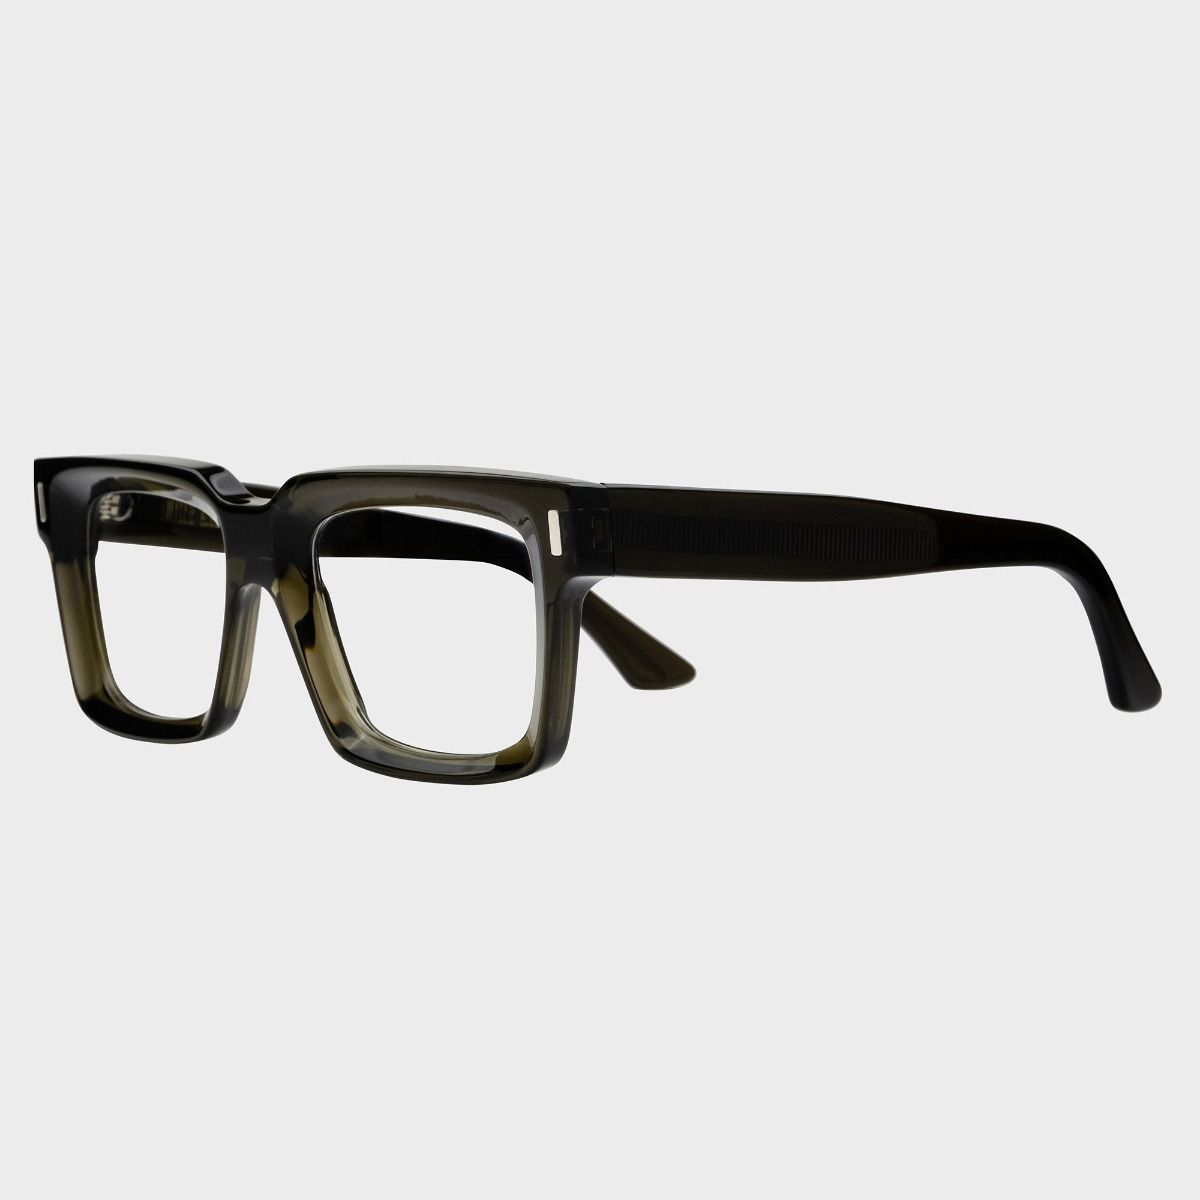 Cutler and Gross, 1386 Optical Square Glasses - Olive Green